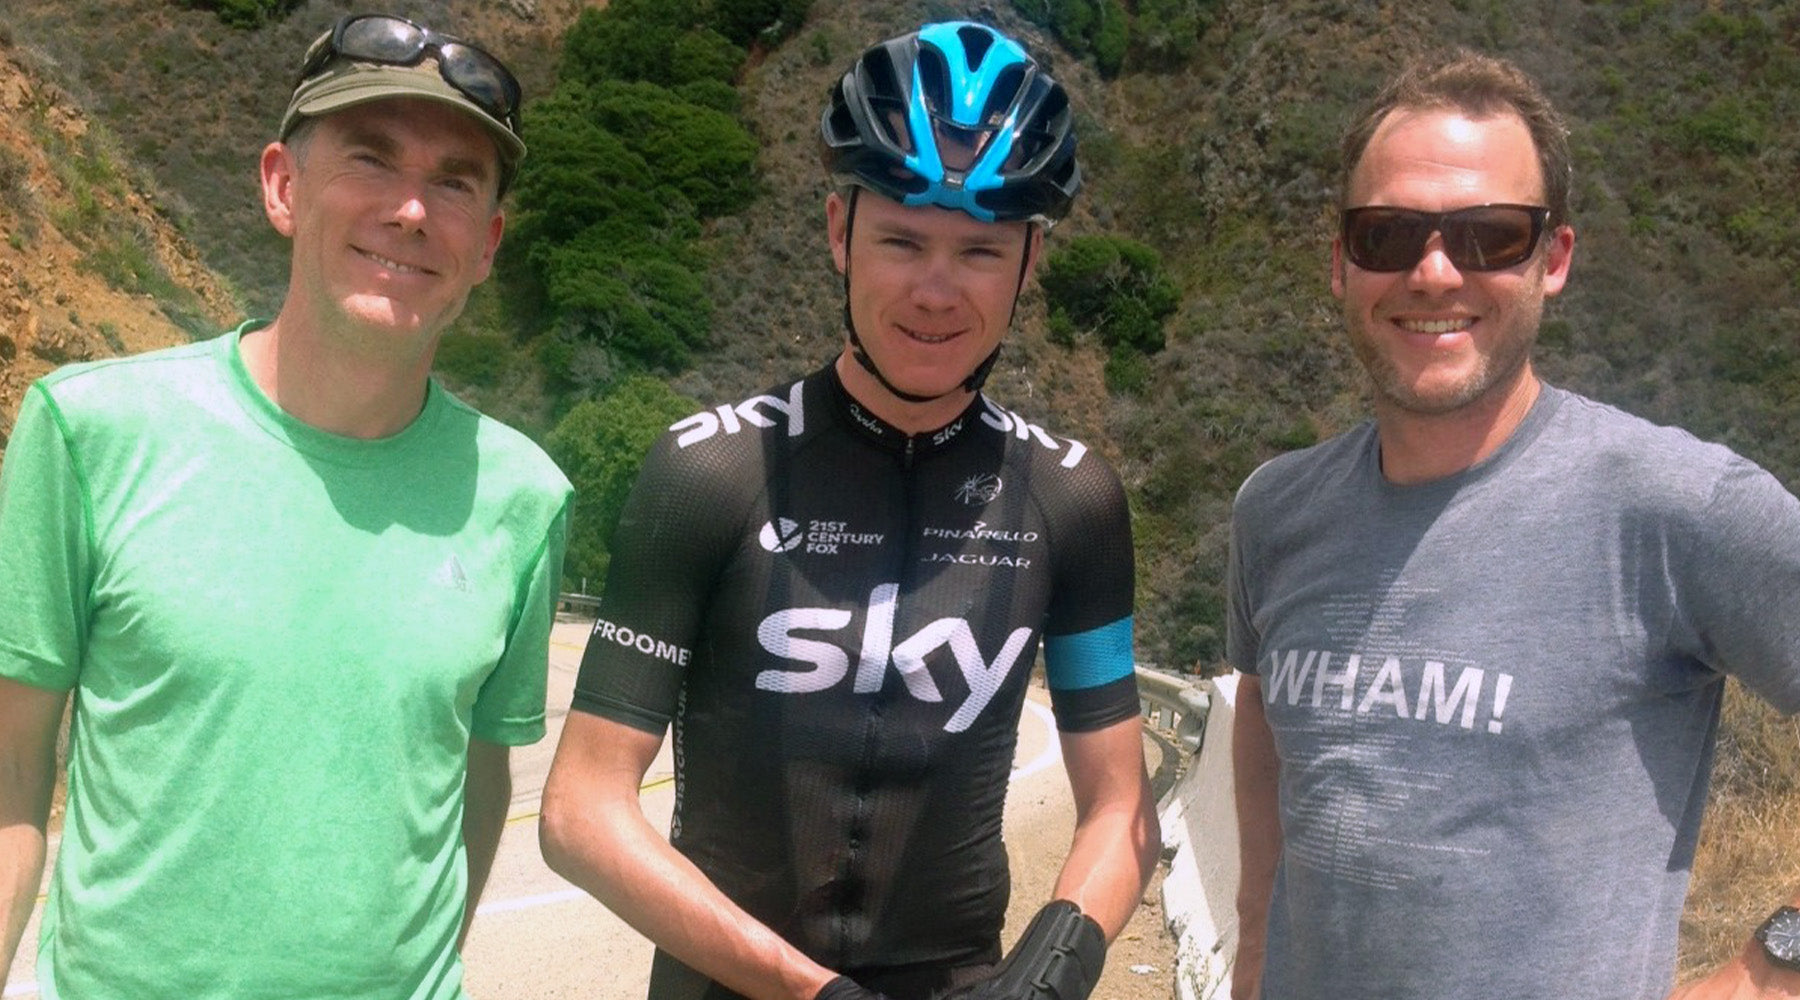 Chris Froome from La Jolla to Leo Carillo, and up to Pismo